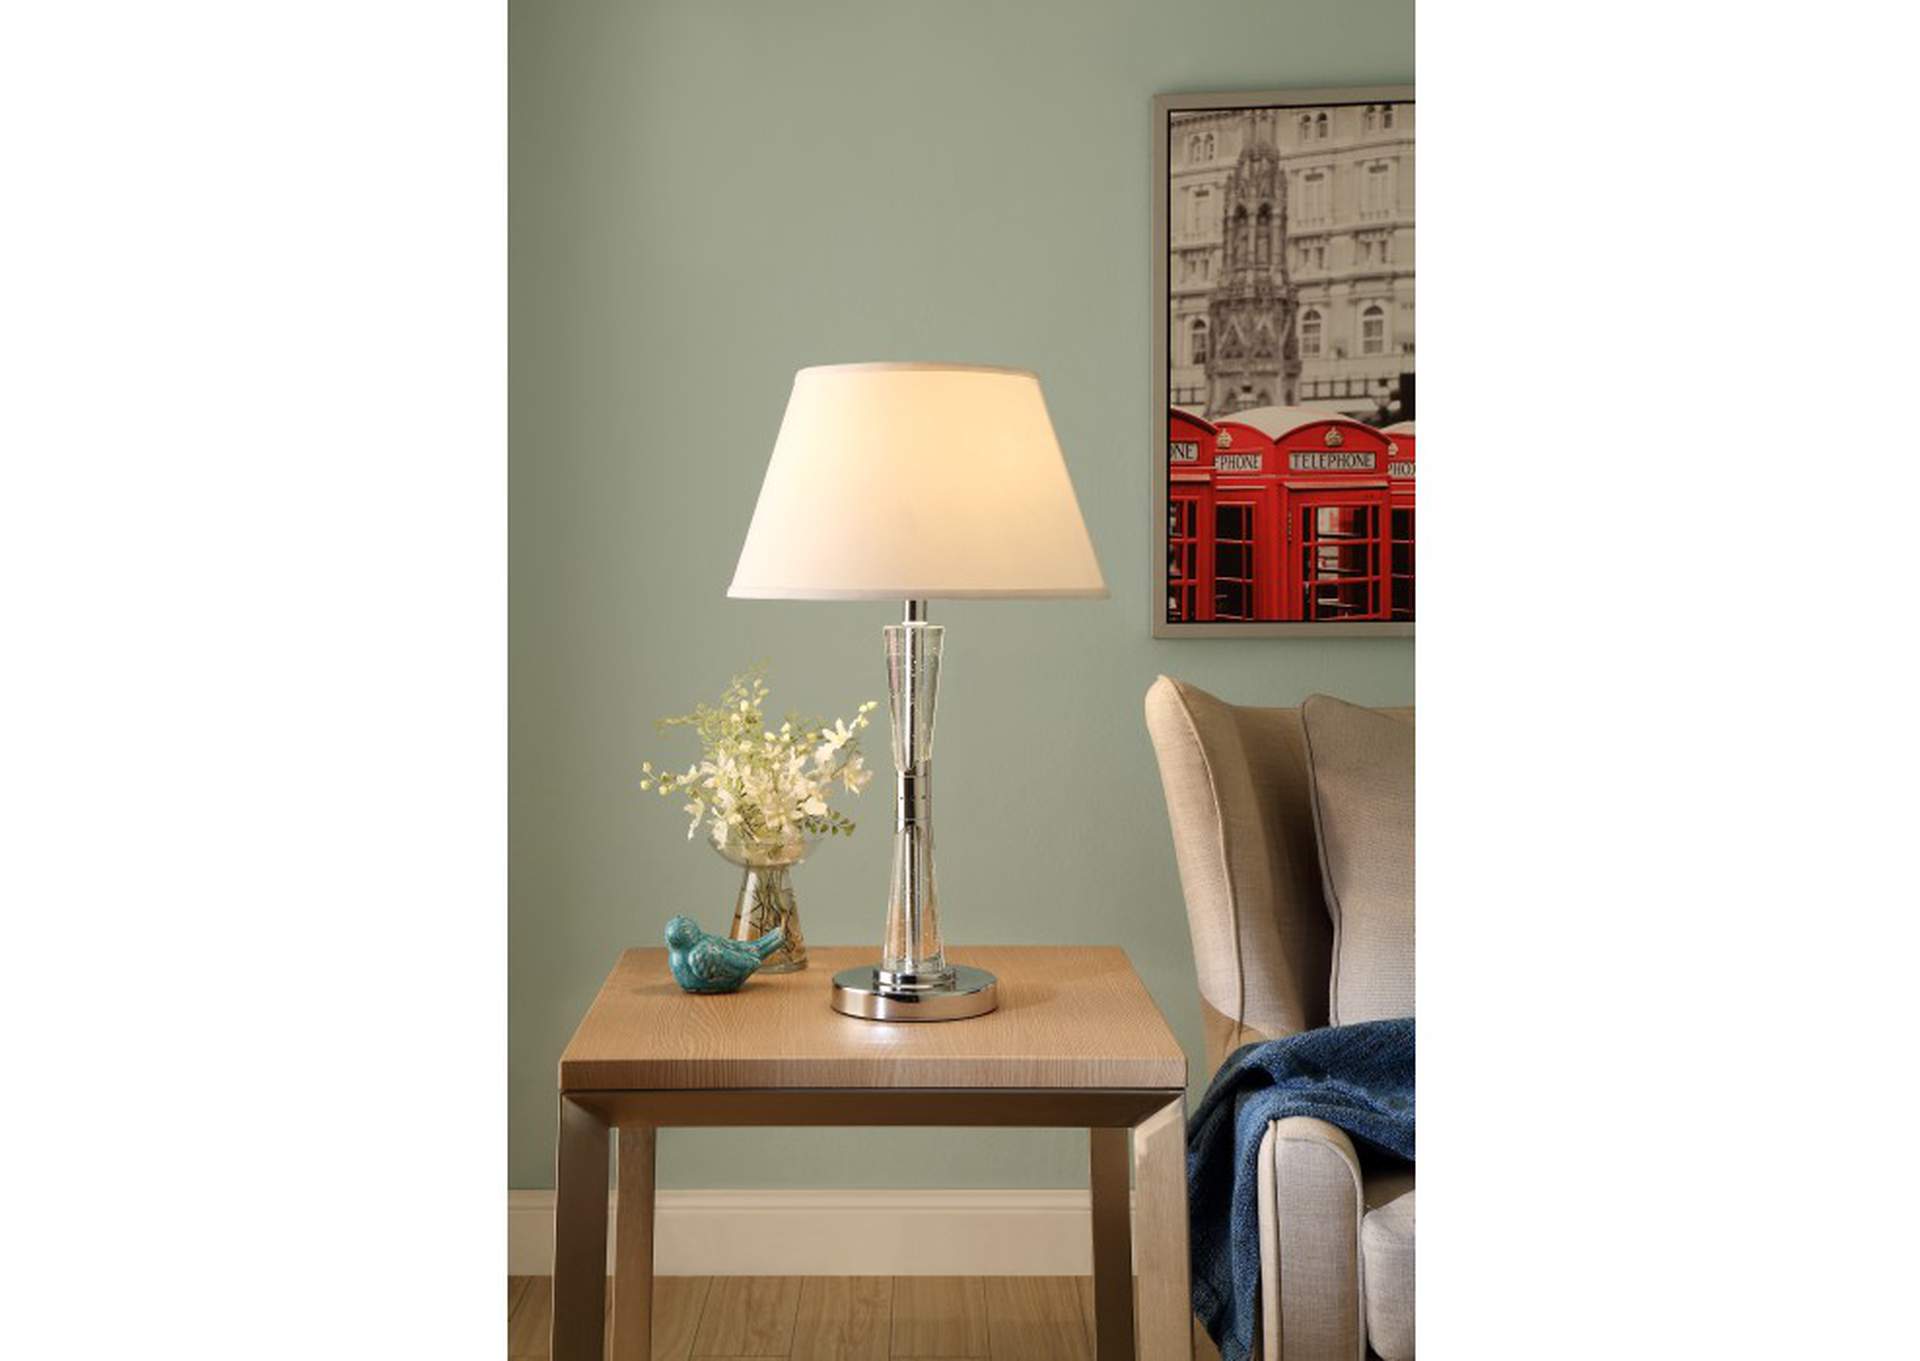 Transect Table Lamp,Homelegance